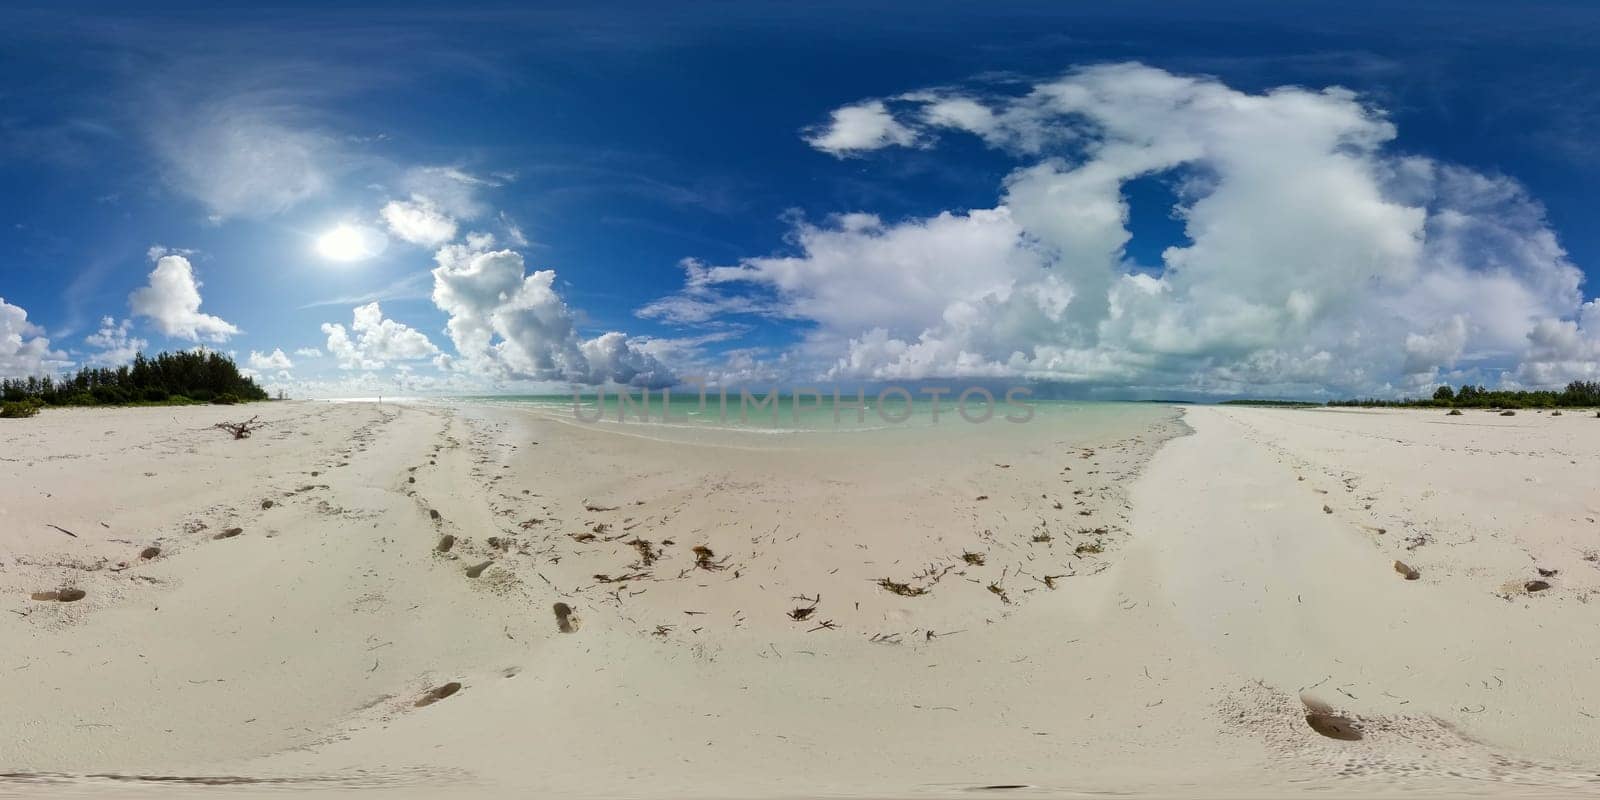 Seascape with tropical sandy beach. Philippines. VR 360. by Alexpunker